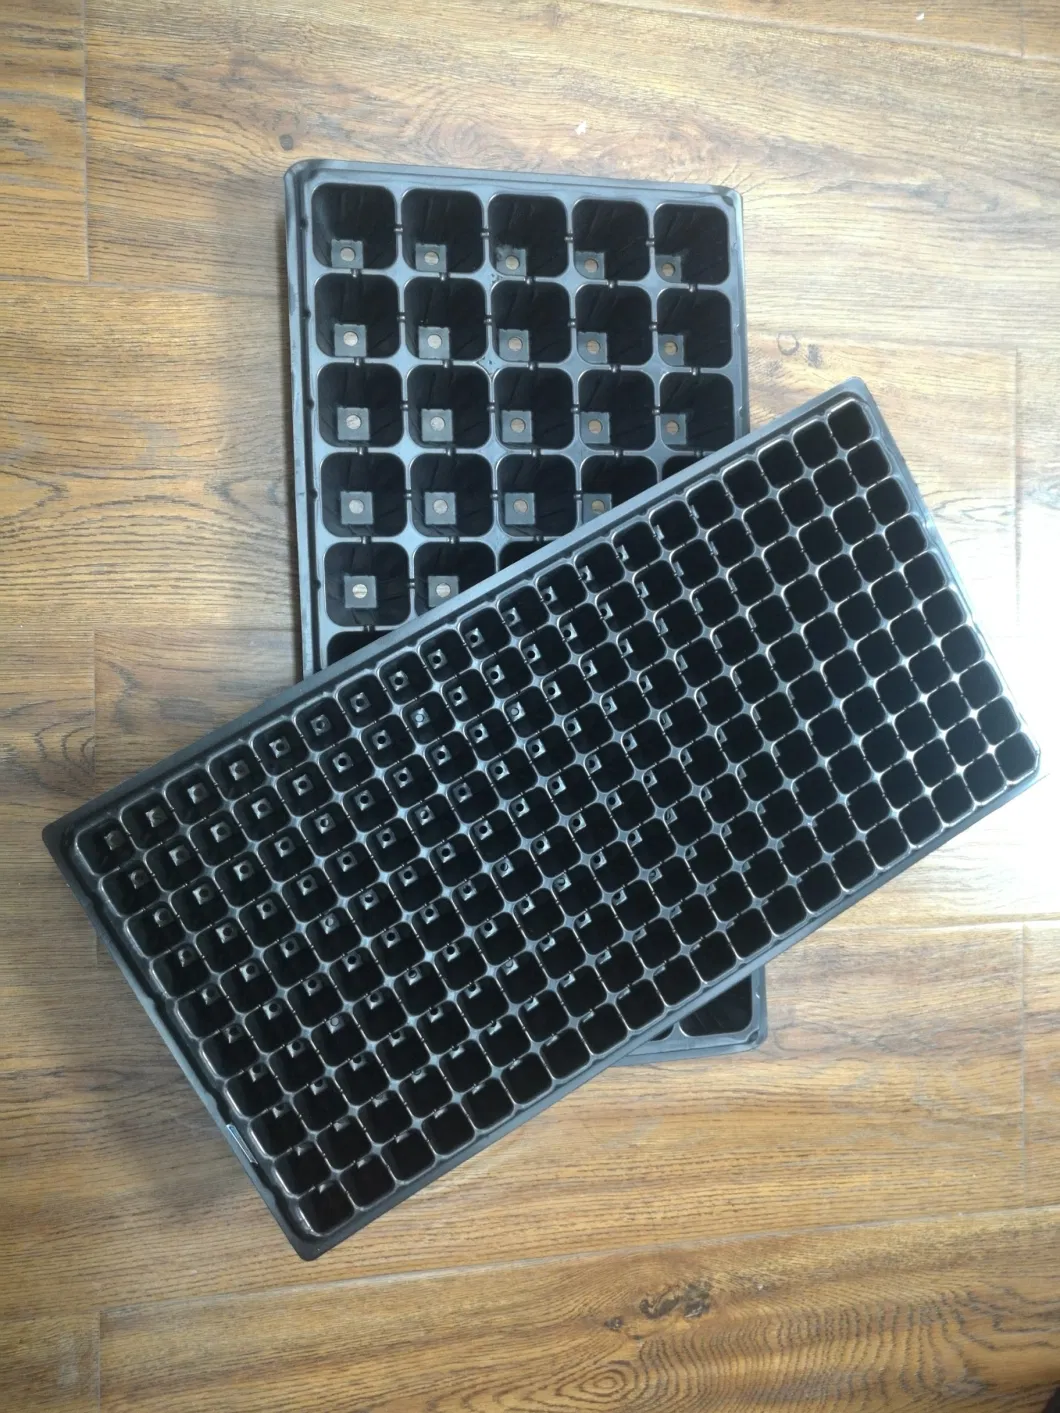 PS or PVC Material Seeding Tray for Greenhouse Growing Seedings